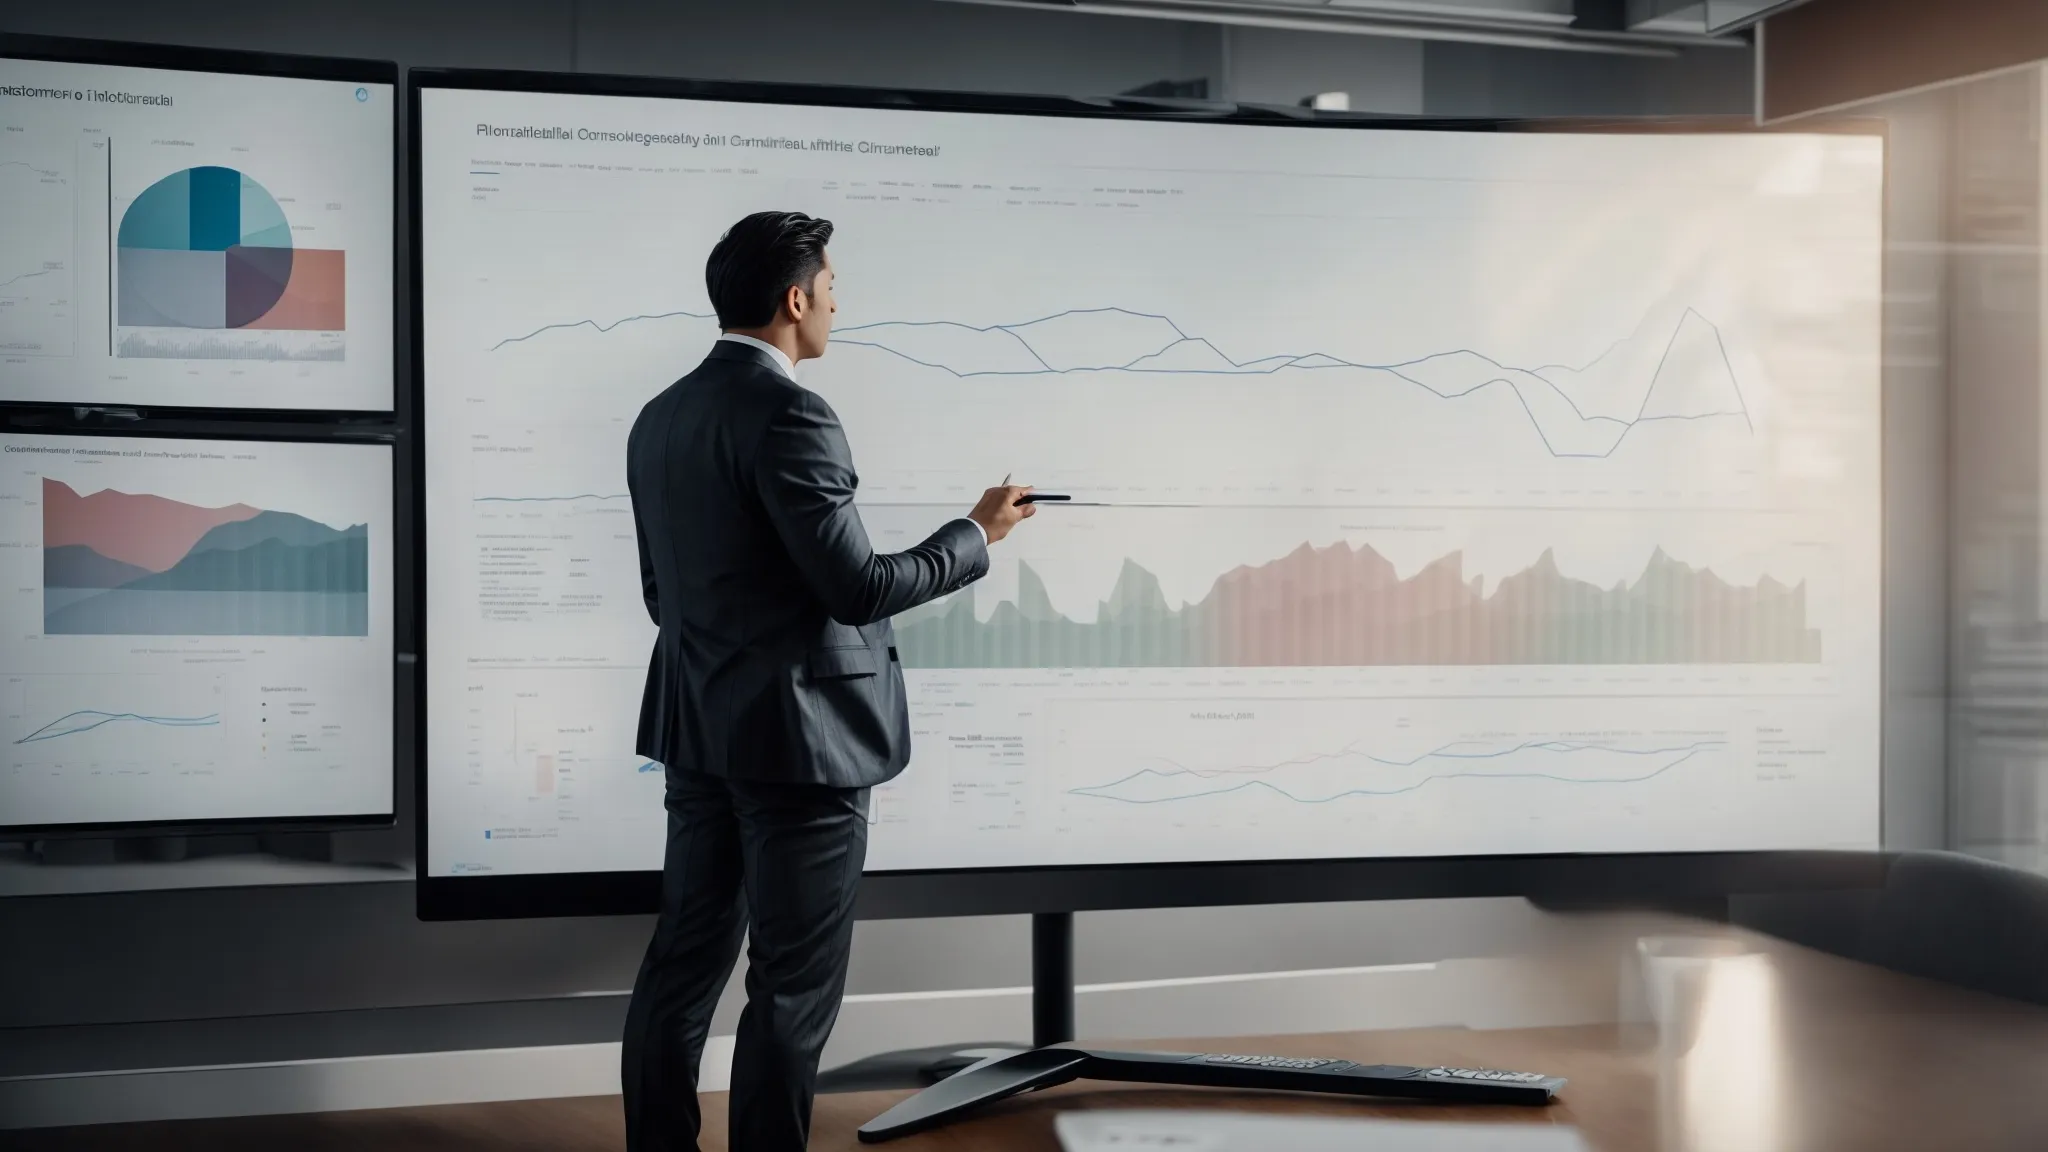 a confident individual analyzing graphs and charts on a large monitor in a modern office setting.